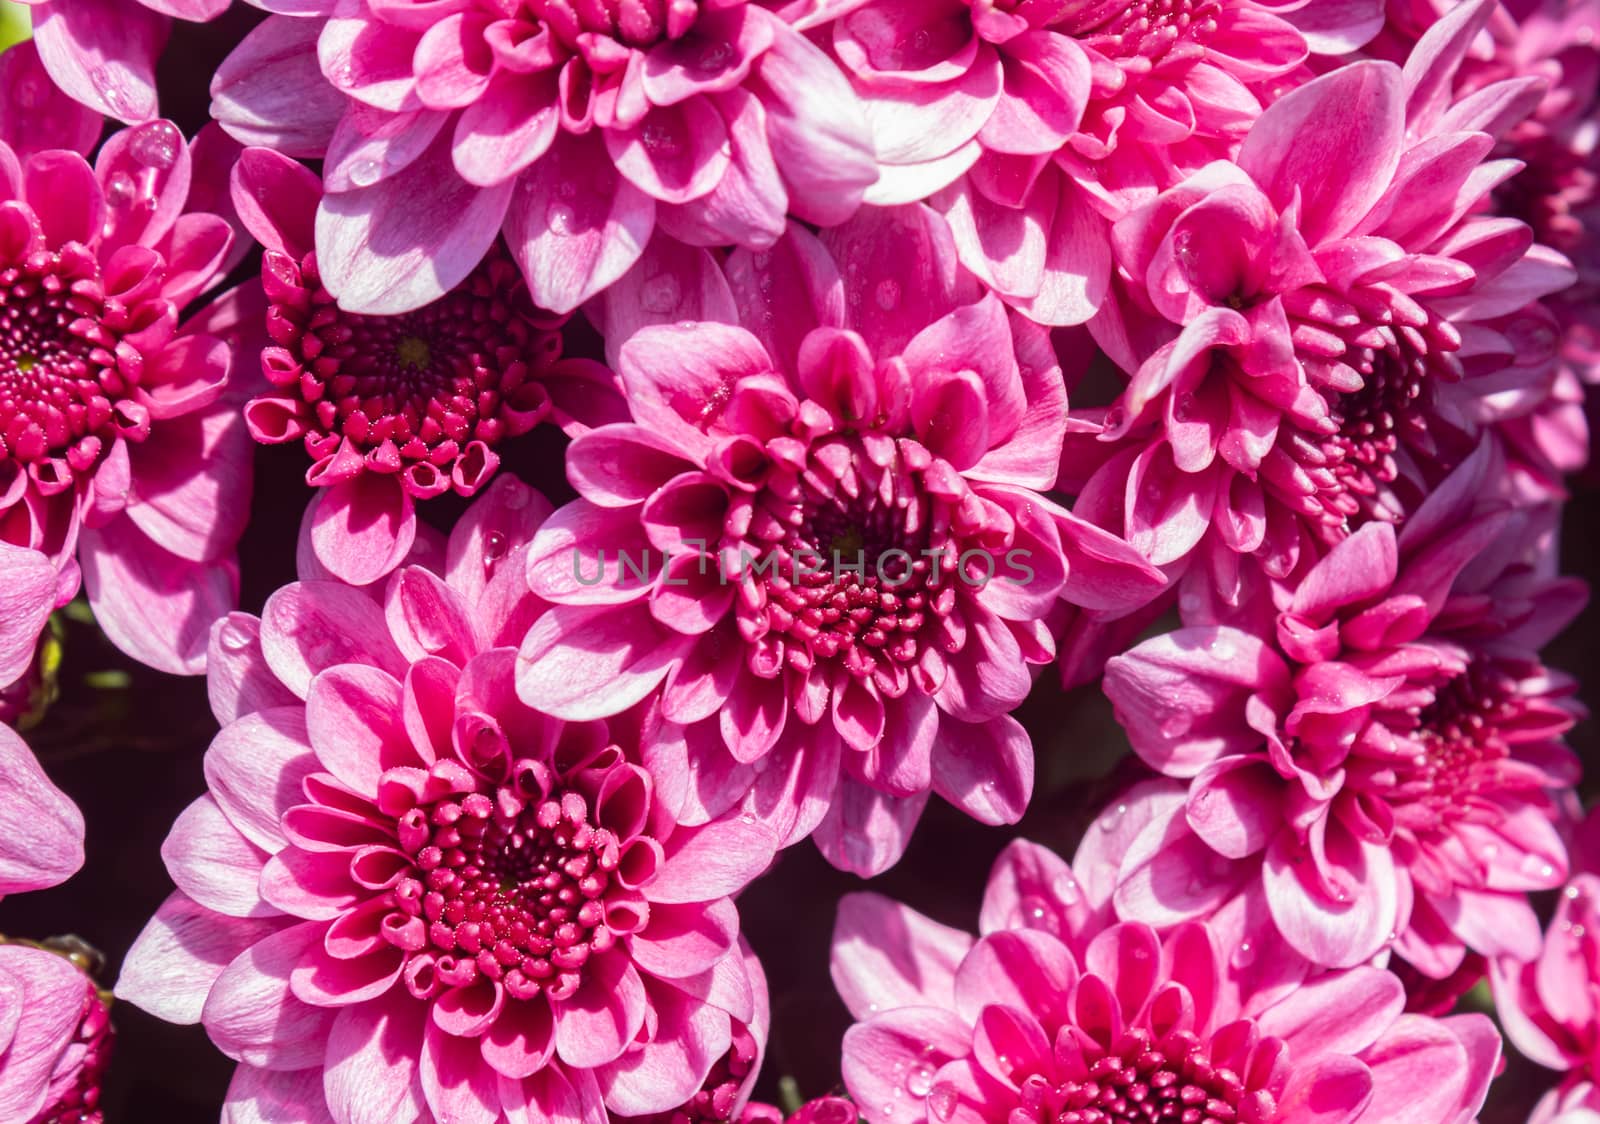 Magenta Pink Chrysanthemum or Mums Flowers in Garden with Natural Light Background in Zoom View